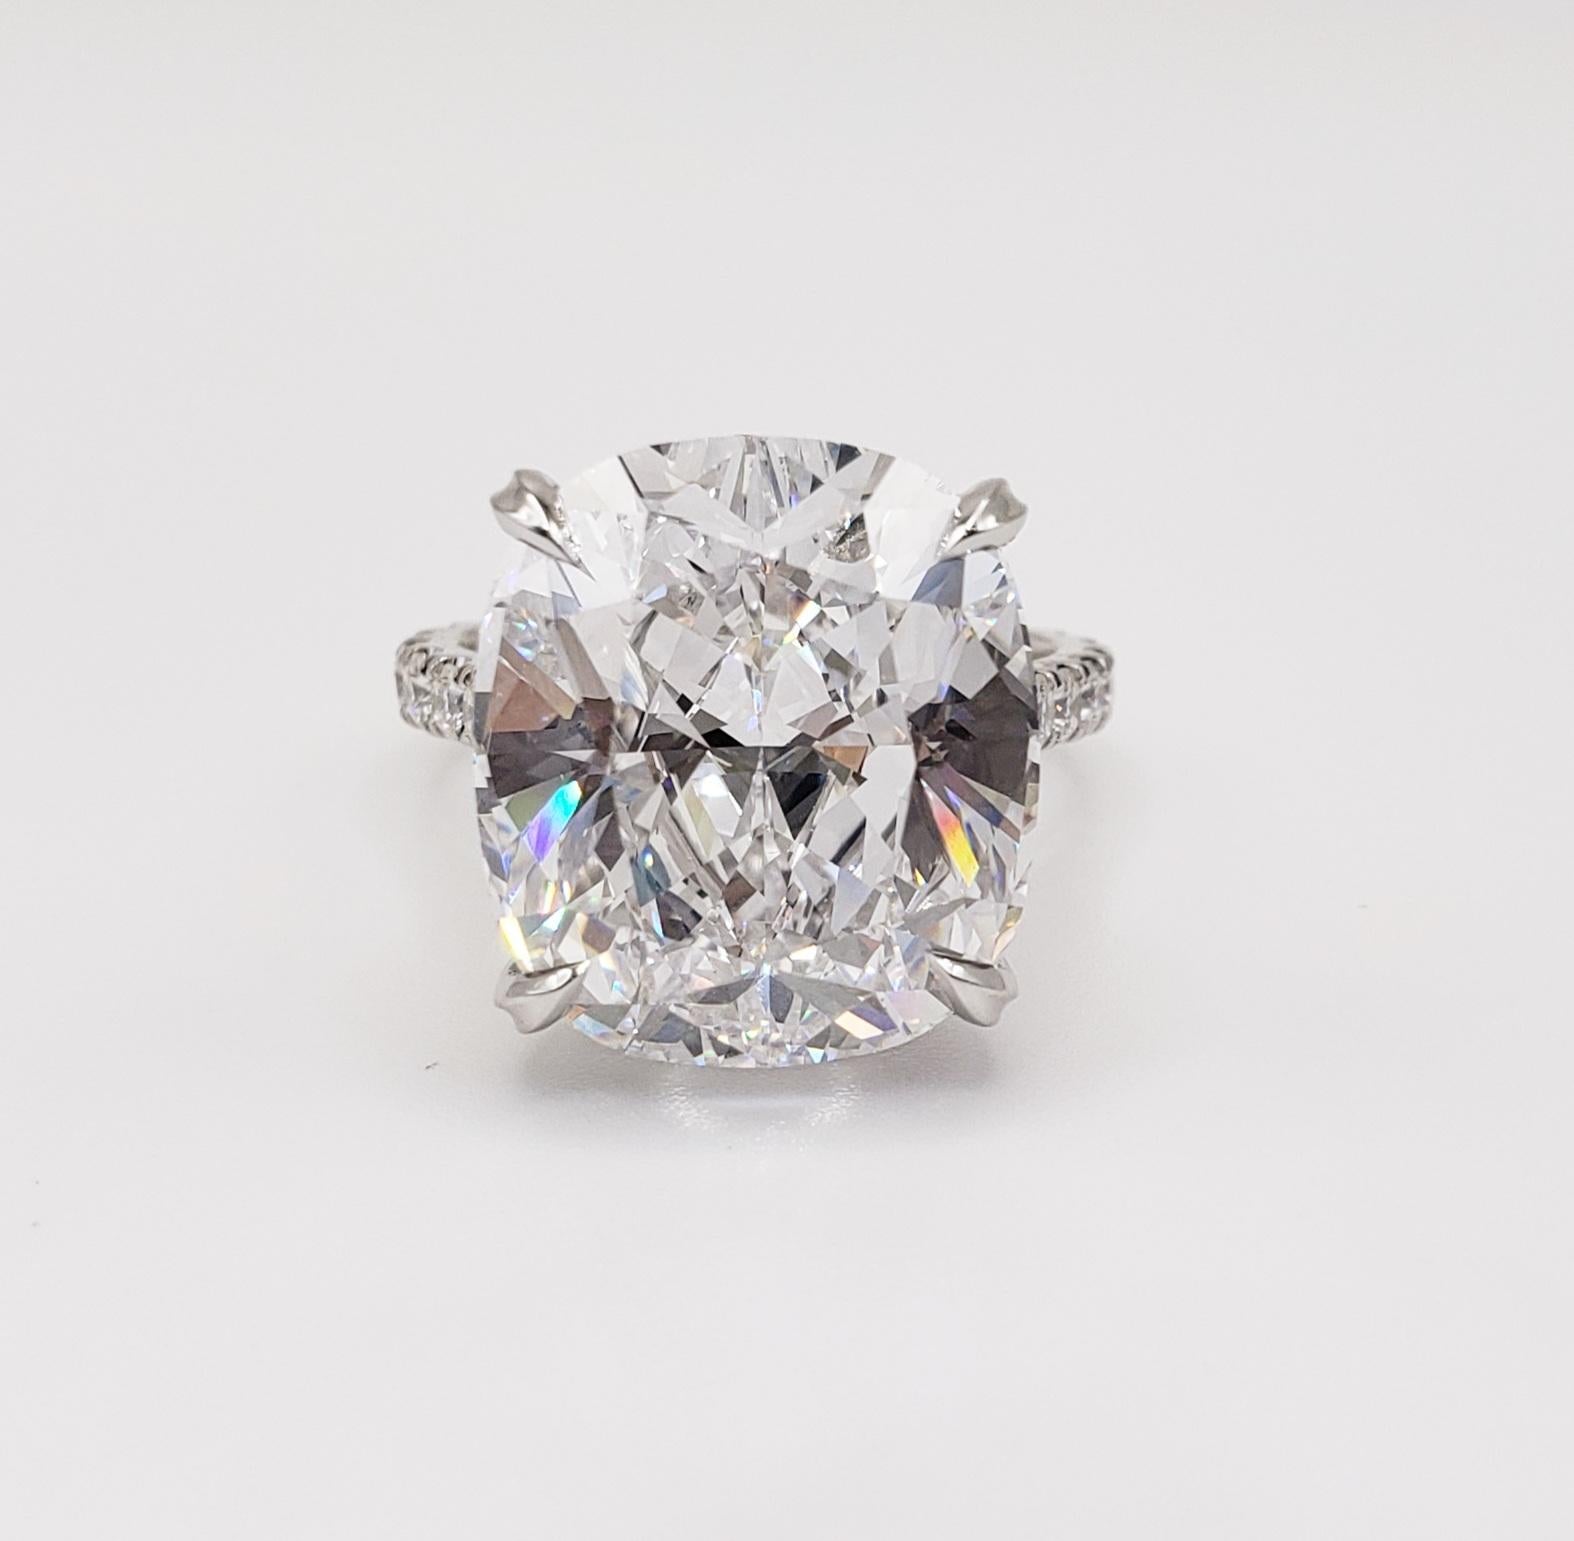 Rosenberg Diamonds & Co. 15.58 carat Radiant shape D color Internally Flawless Type 2 A clarity is accompanied by a GIA certificate. This breathtaking prefect cushion is full of brilliance and is extremely rare. It is set in a handmade platinum